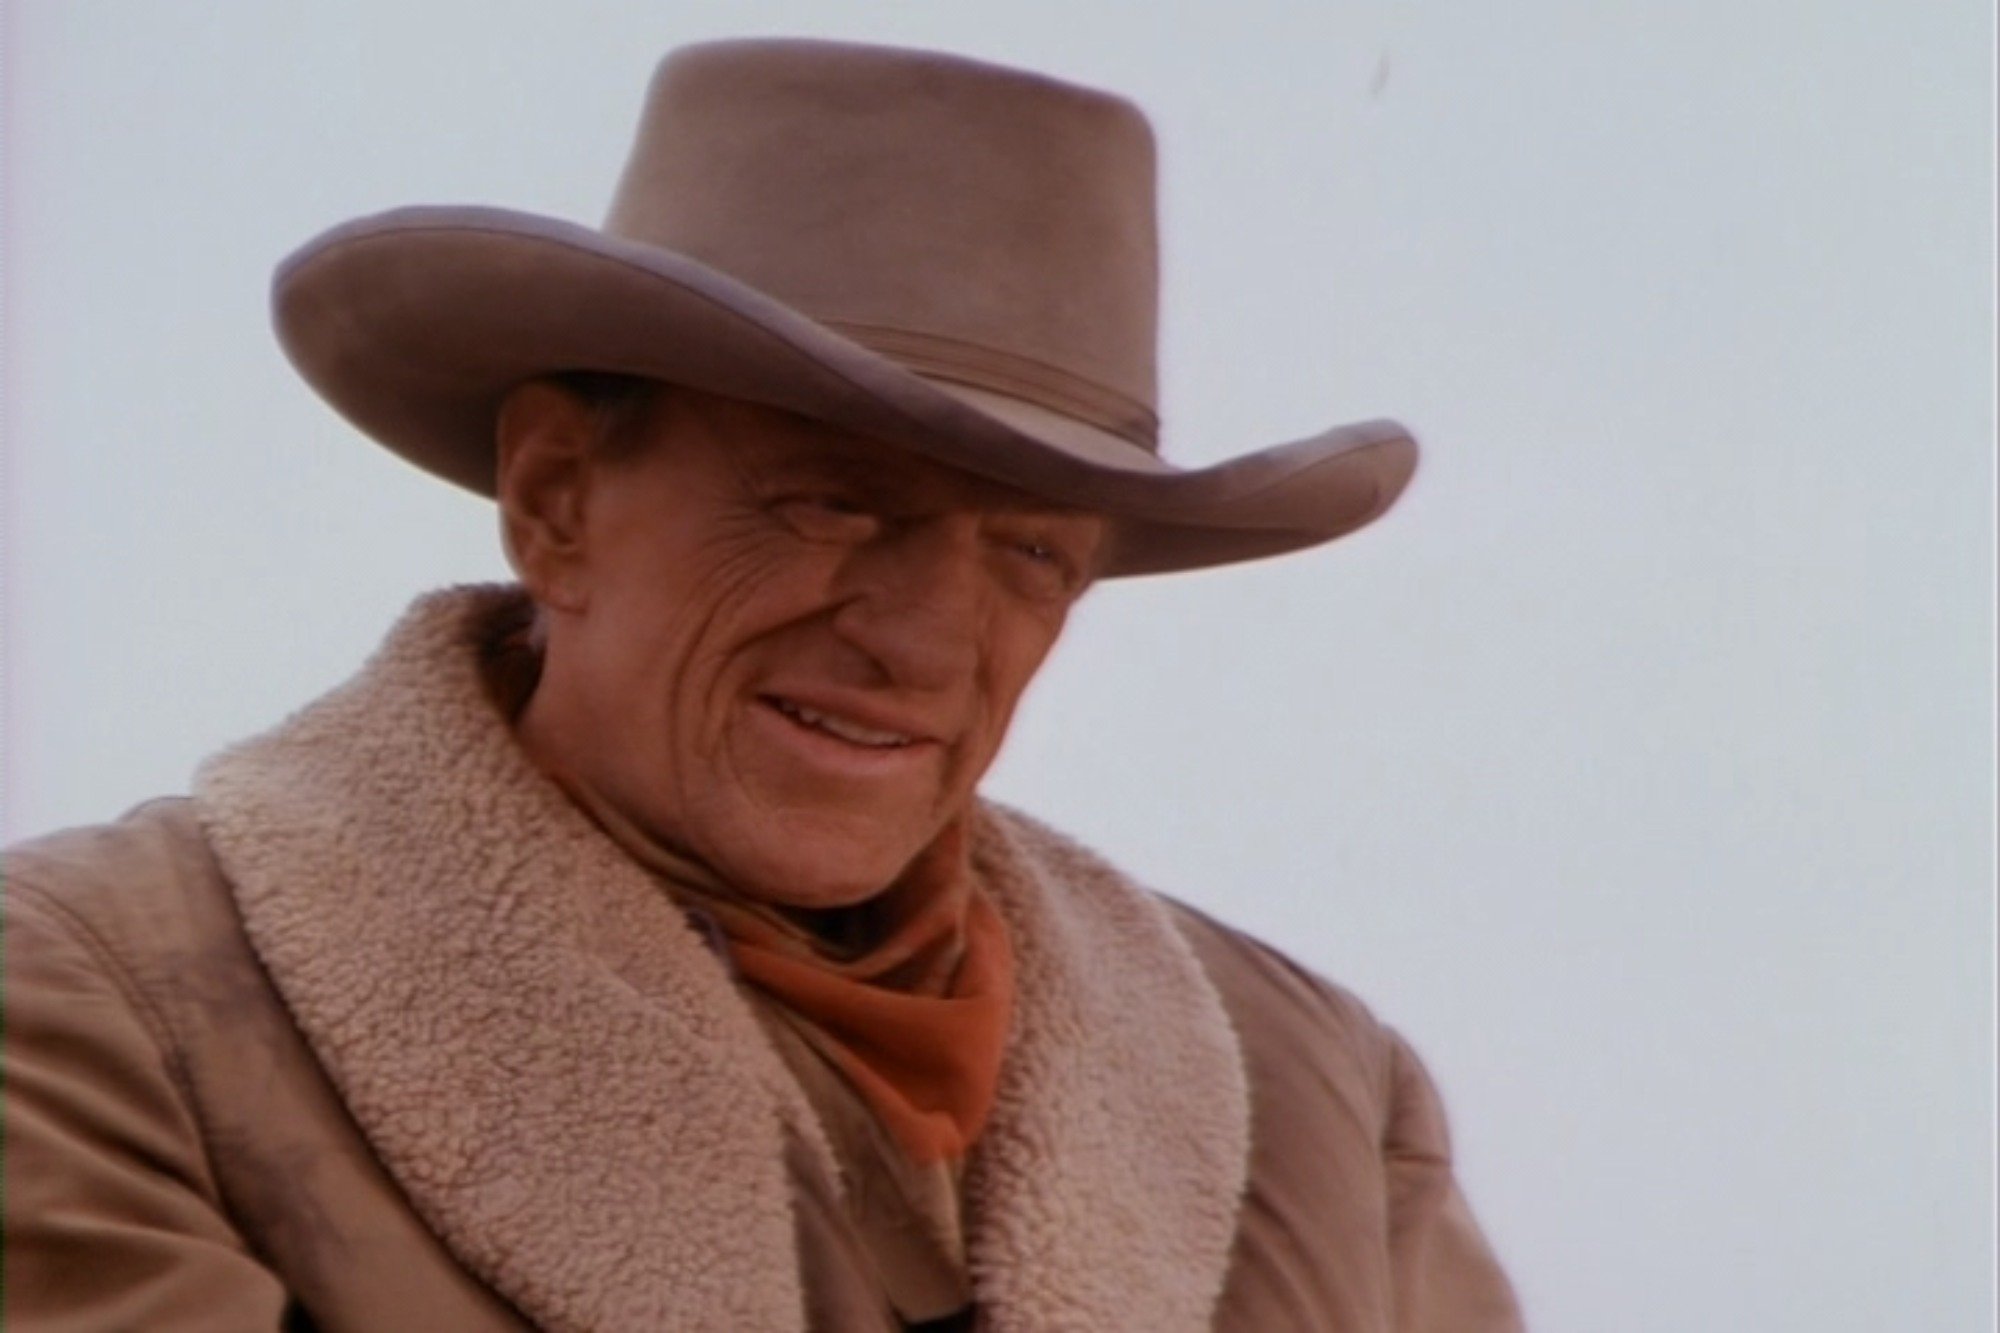 'Gunsmoke: To the Last Man' James Arness as Matt Dillon with a smile on his face wearing a Western costume.